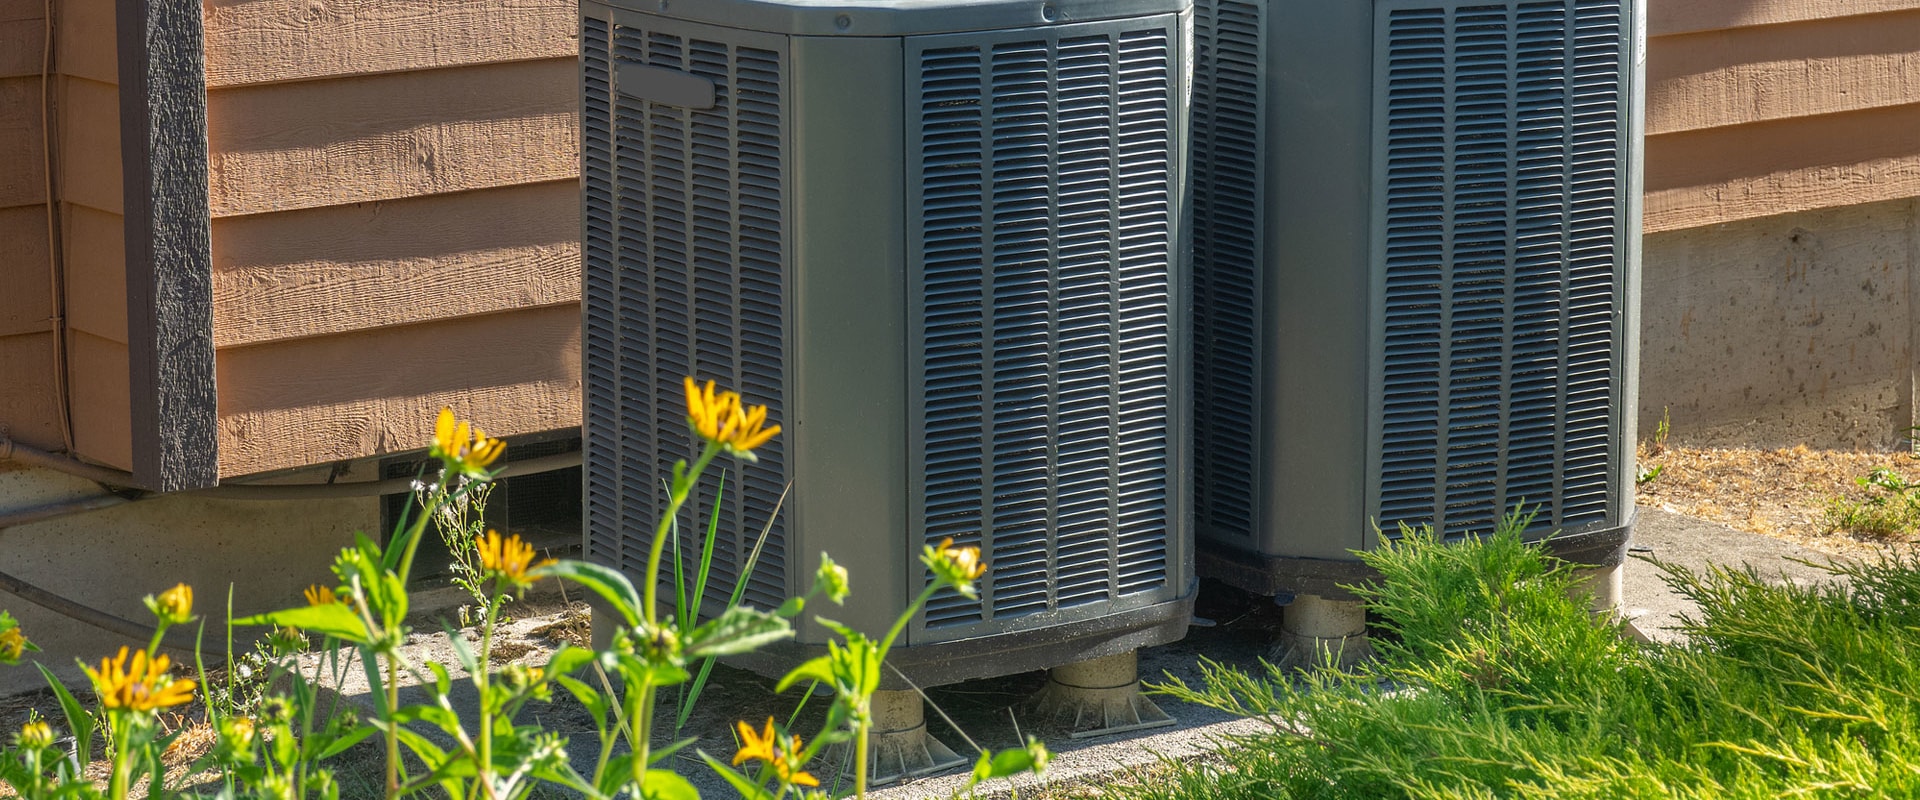 How to Find the Most Energy Efficient Air Conditioner for Your Home